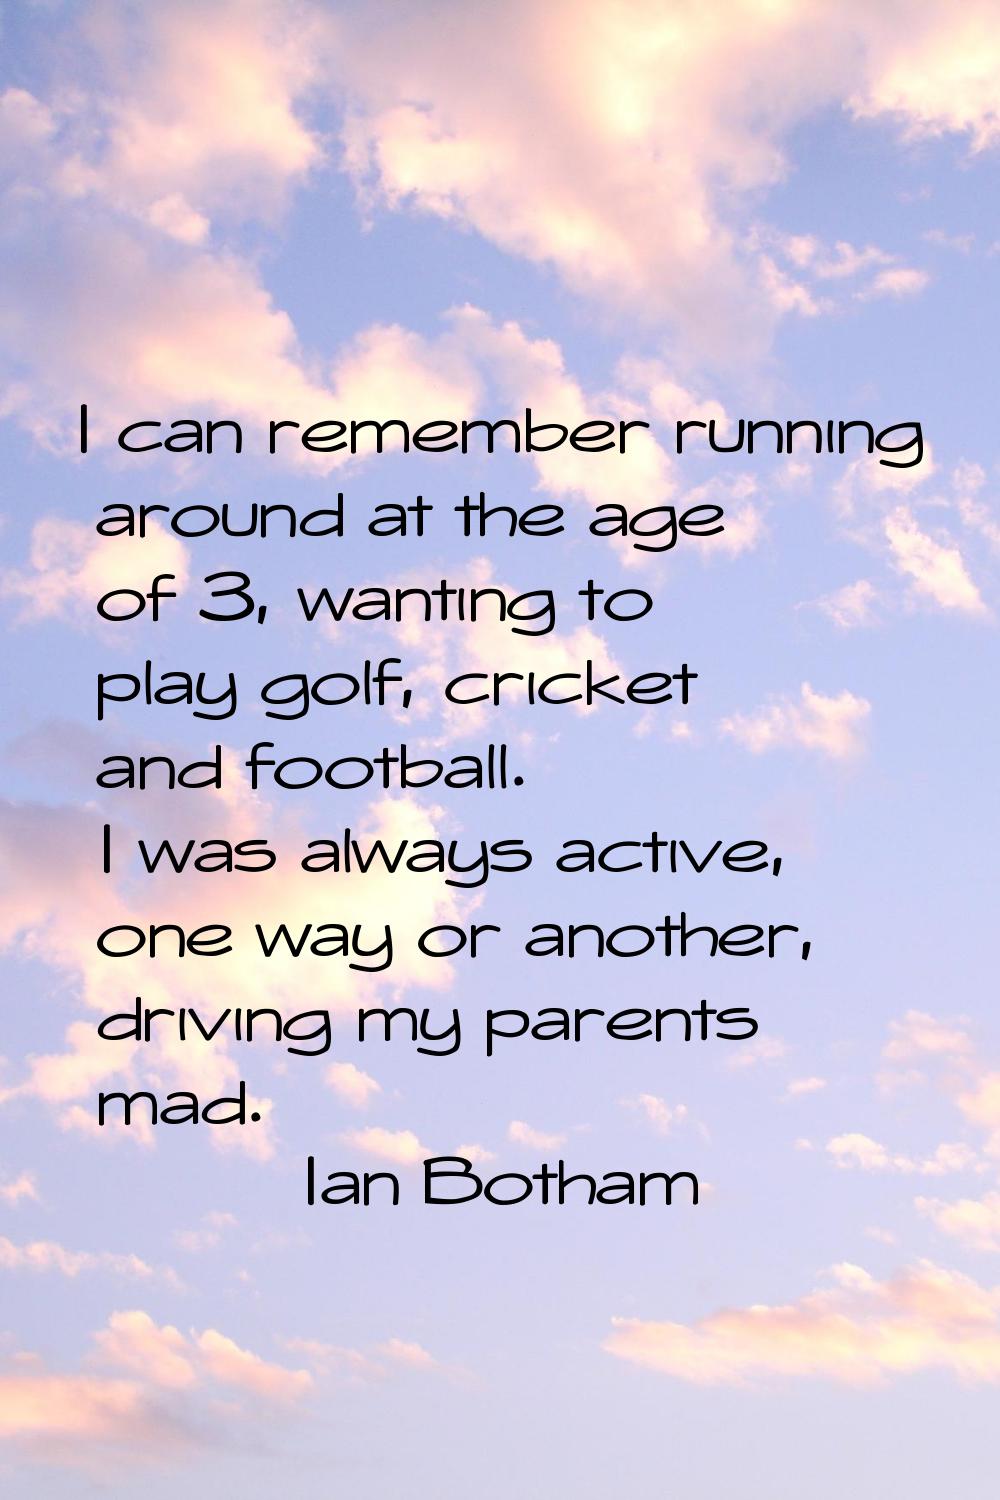 I can remember running around at the age of 3, wanting to play golf, cricket and football. I was al